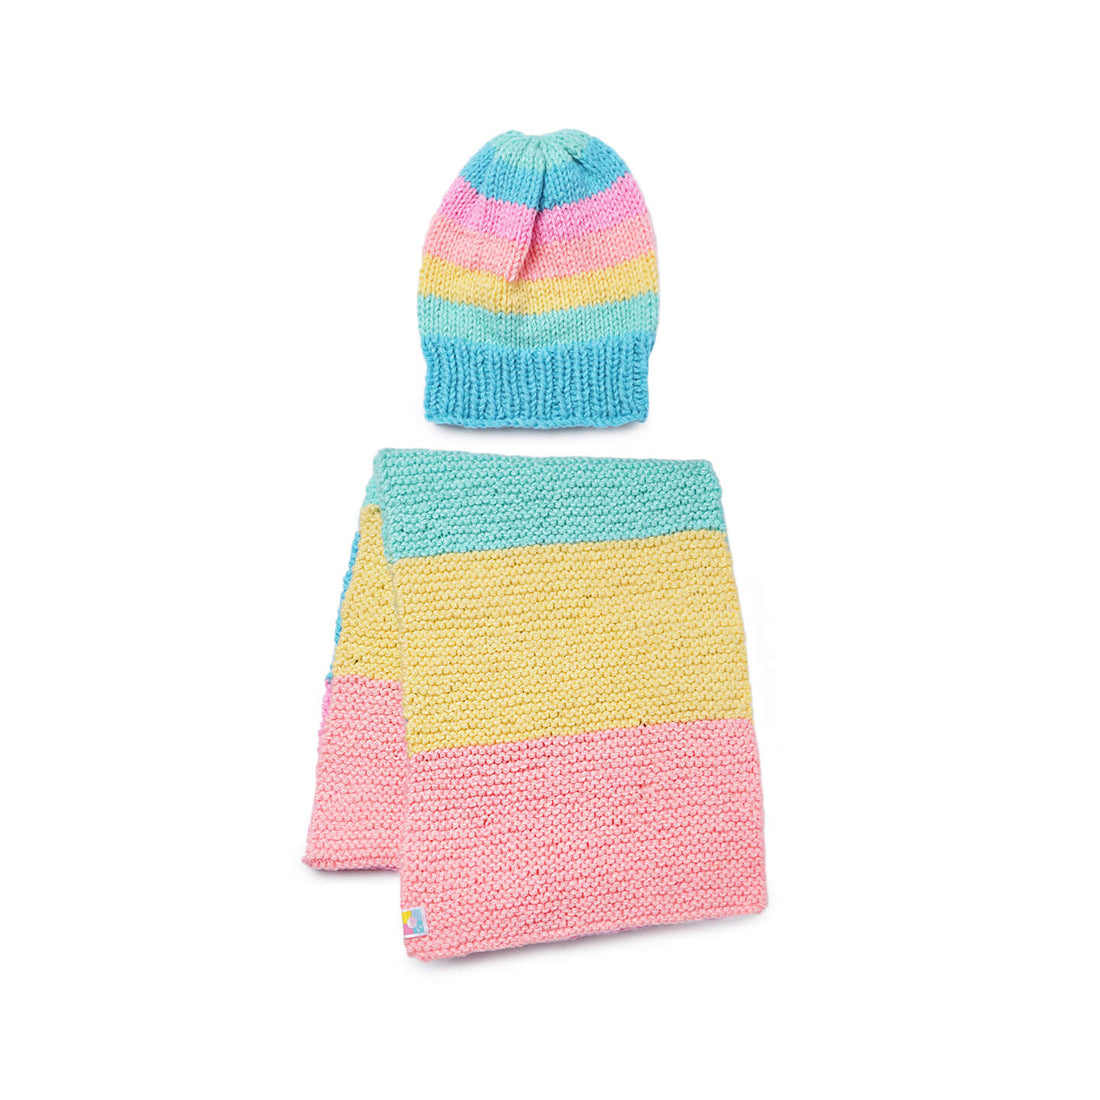 Beanie and Scarf Coordinating Set - 3208